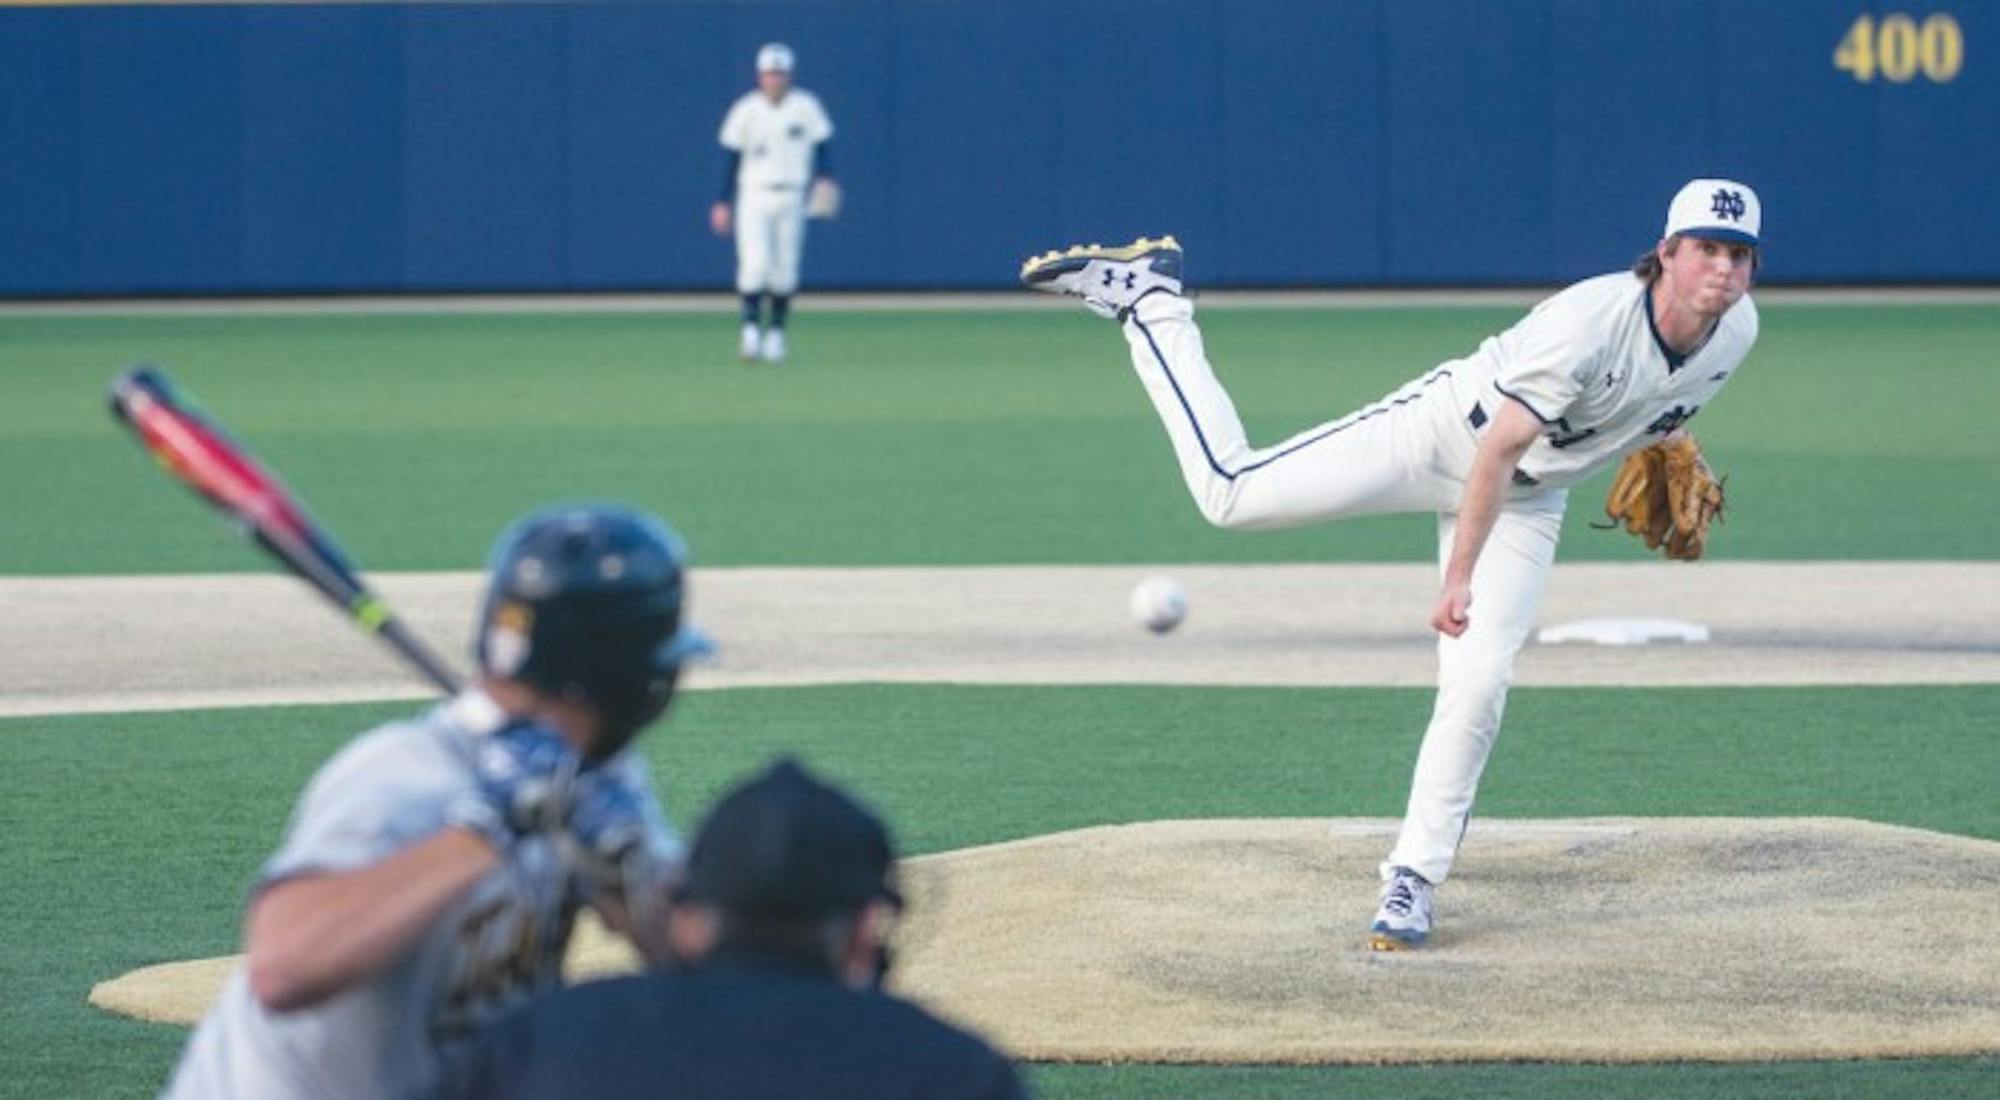 Irish freshman Patrick McDonald throws a pitch during Notre Dame’s 8-3 win over Toledo on April 12 at Frank Eck Stadium.